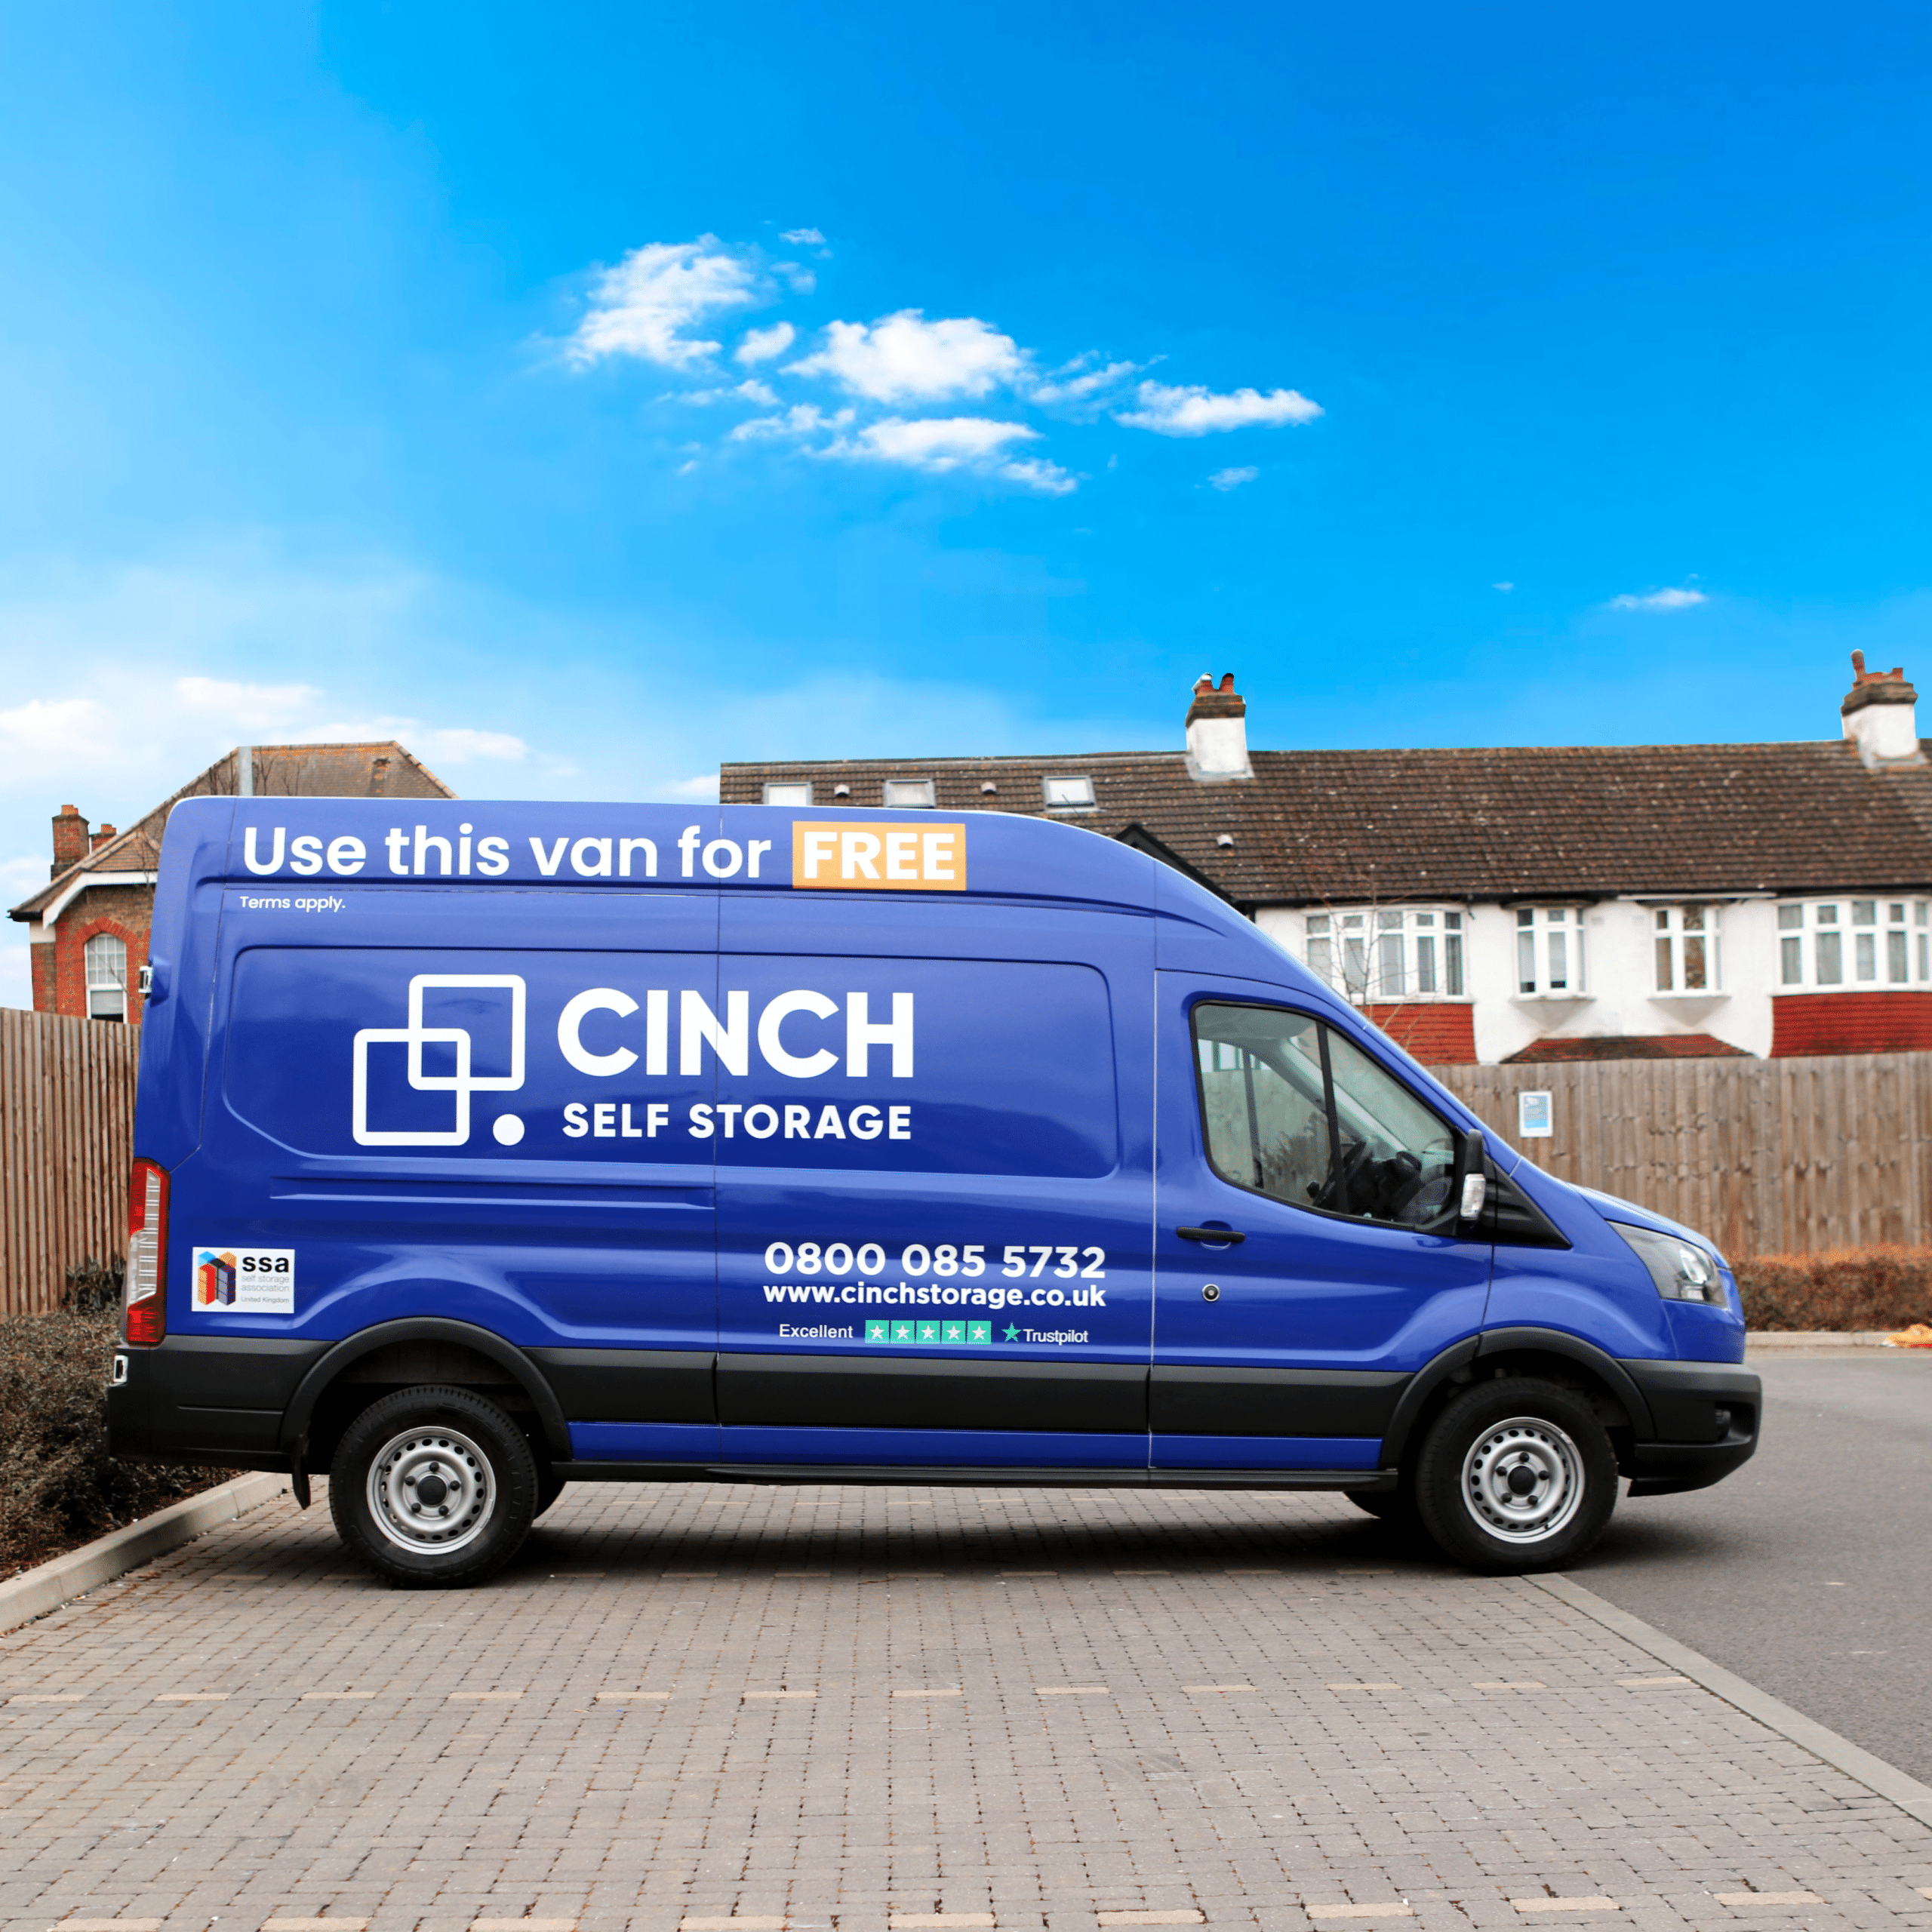 House move storage Gillingham - image shows Cinch Storage van for hire in a parking space with houses and blue sky behind